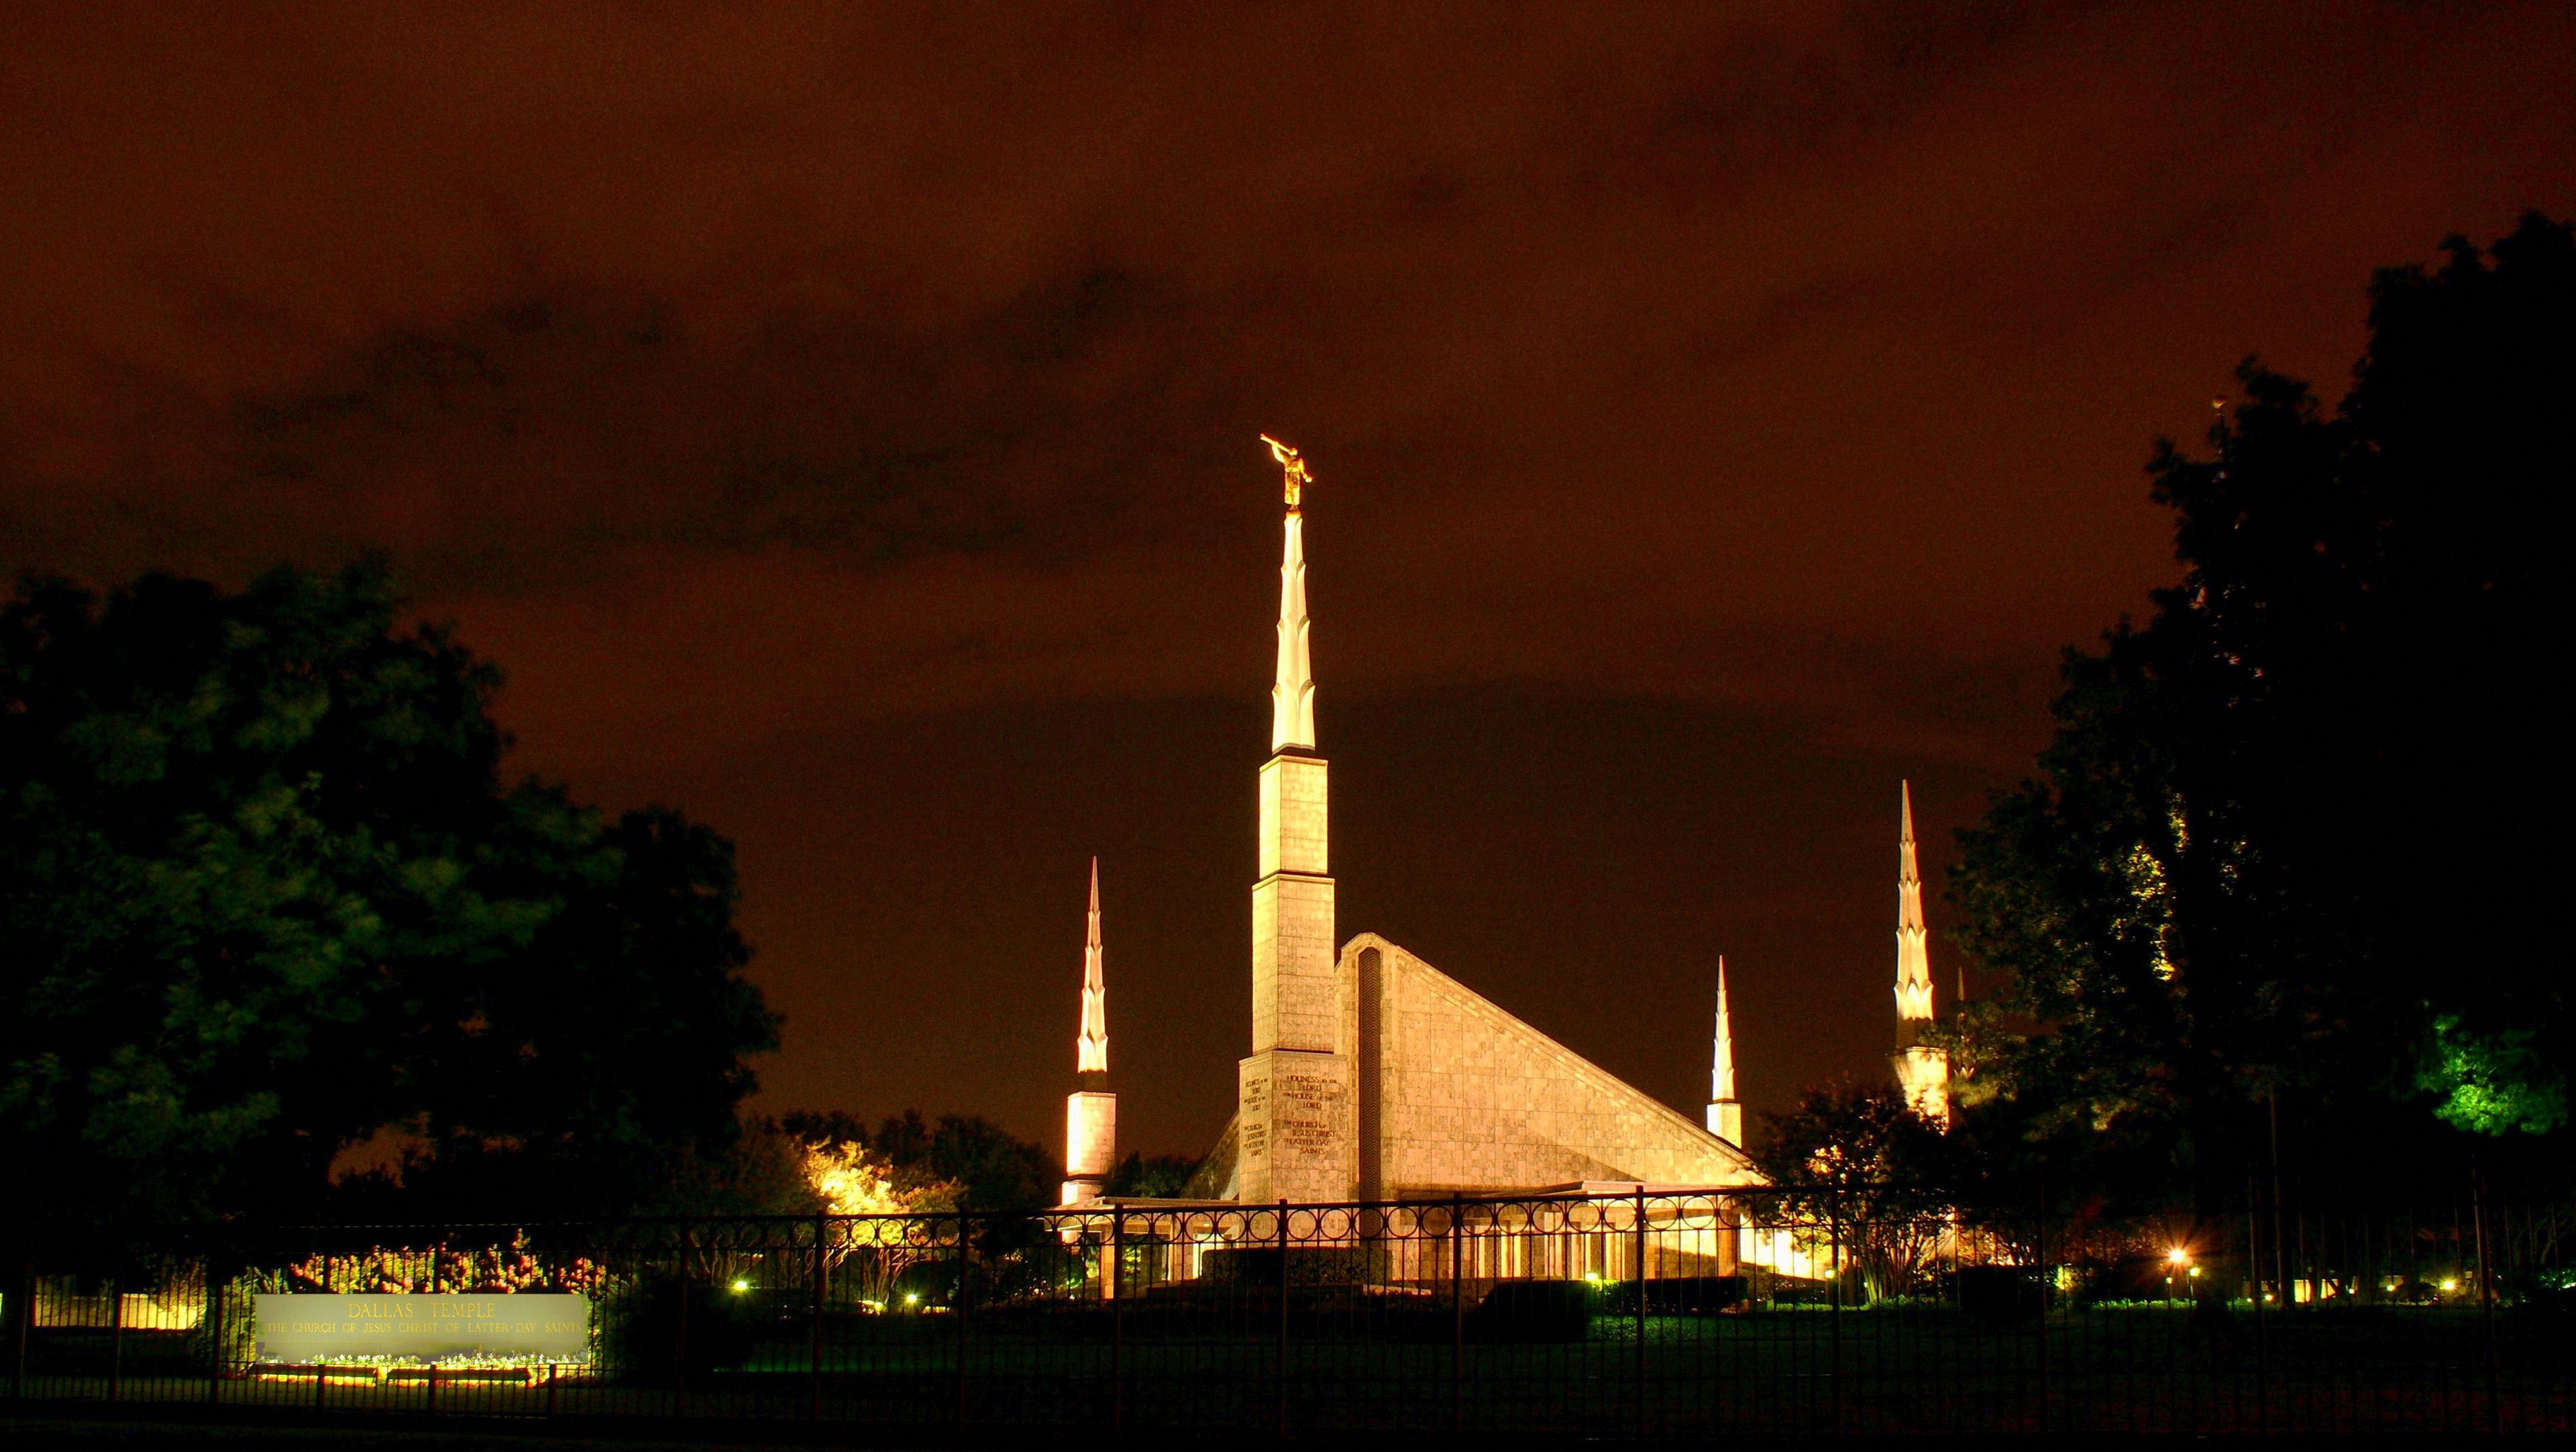 The Dallas Texas Temple is lit up at night.